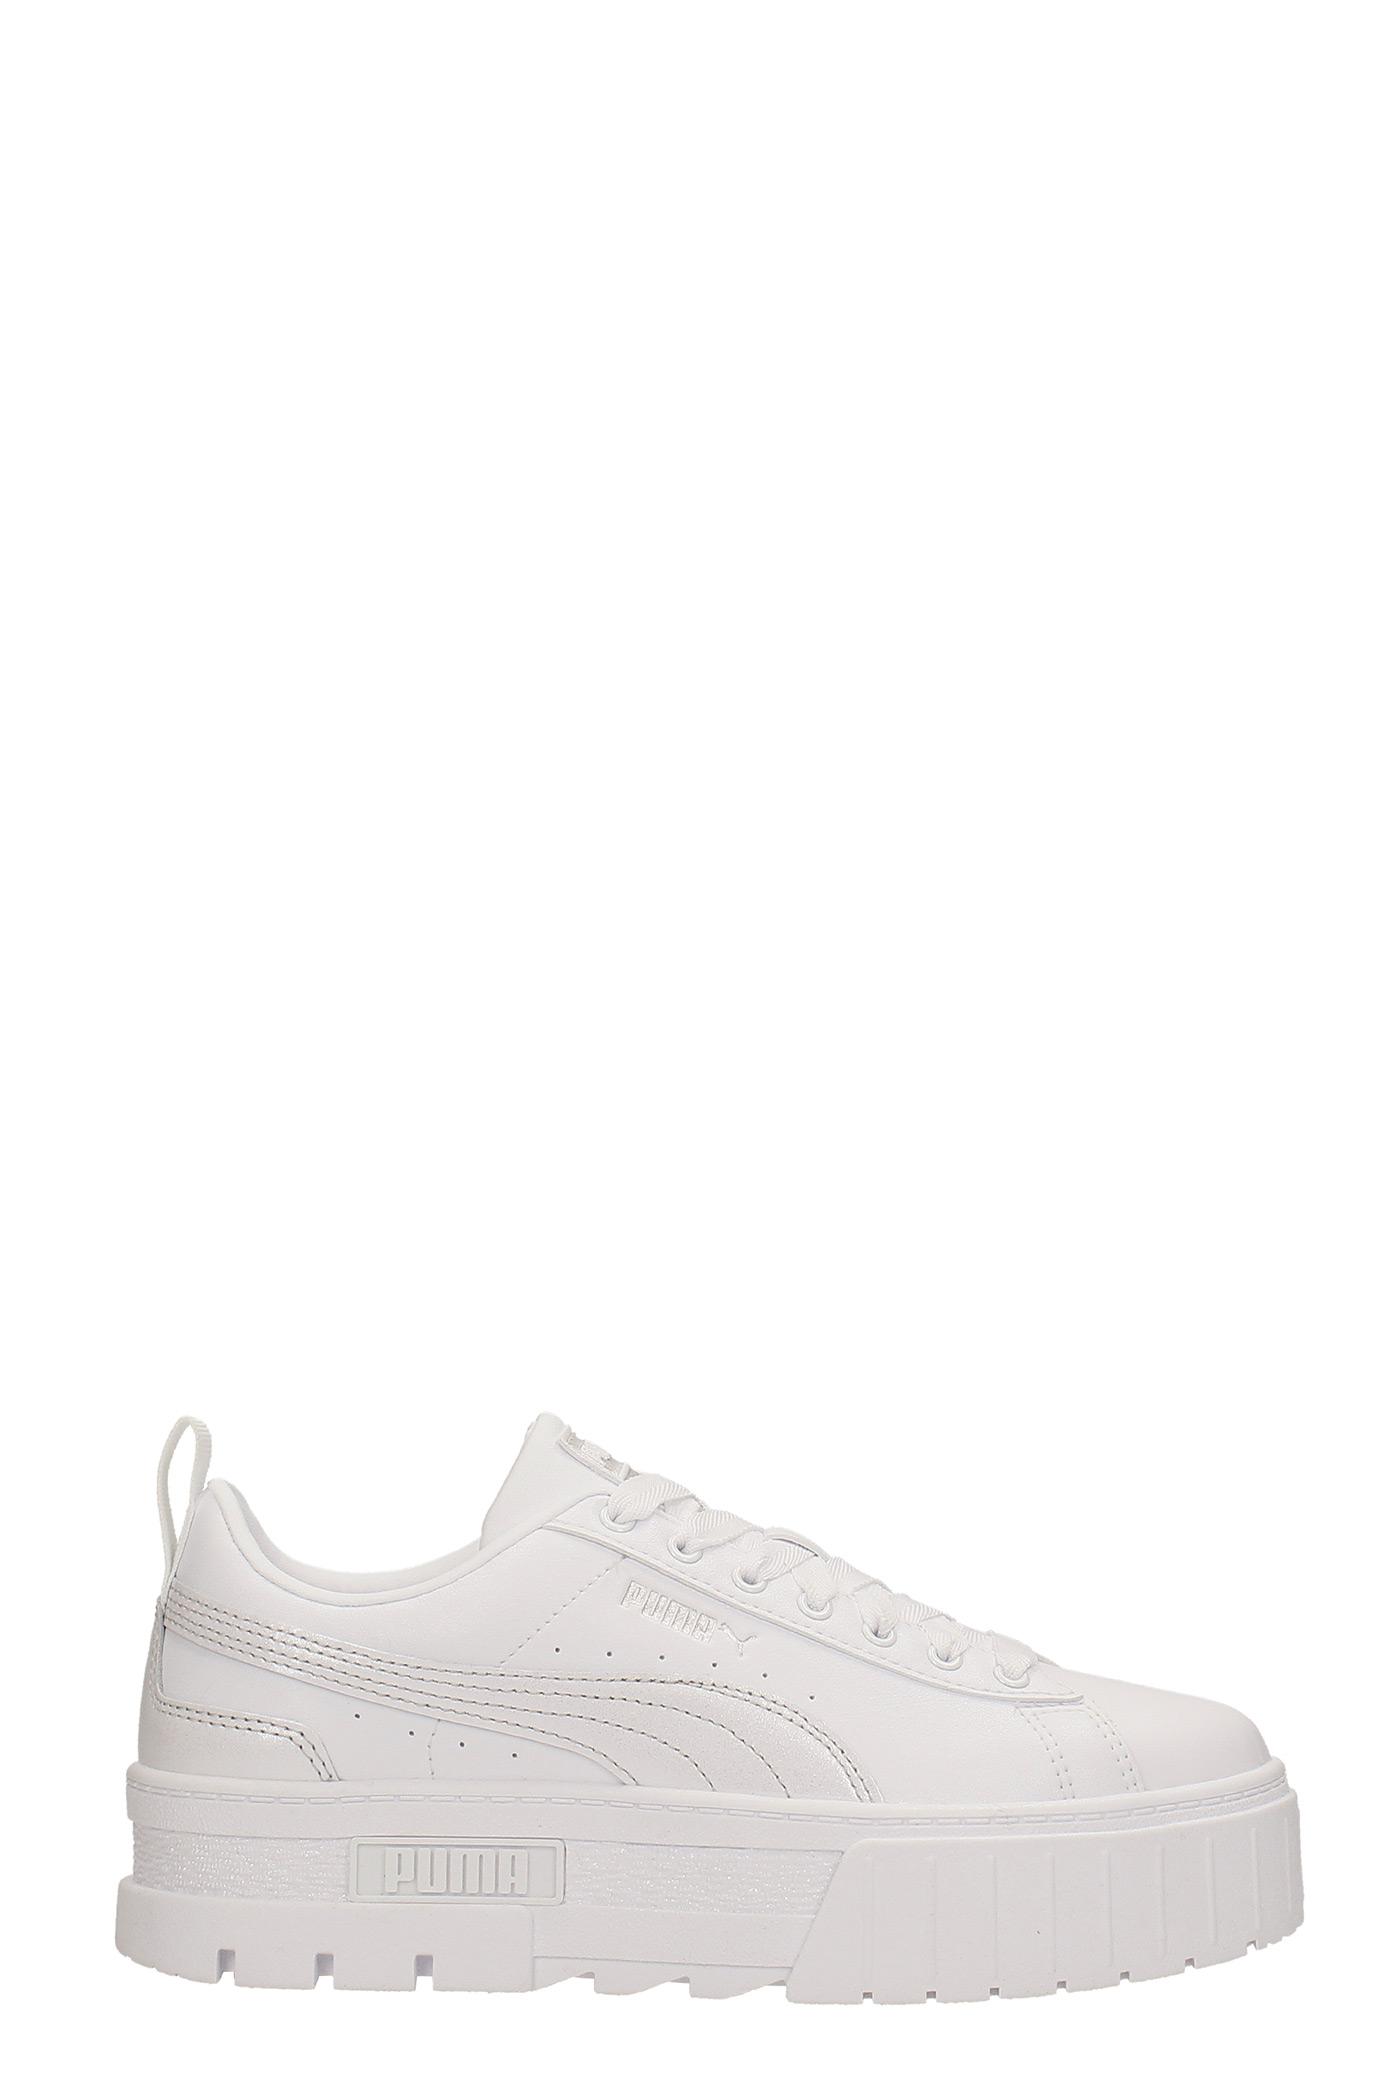 PUMA Mayze Glow Sneakers In White Leather | Lyst